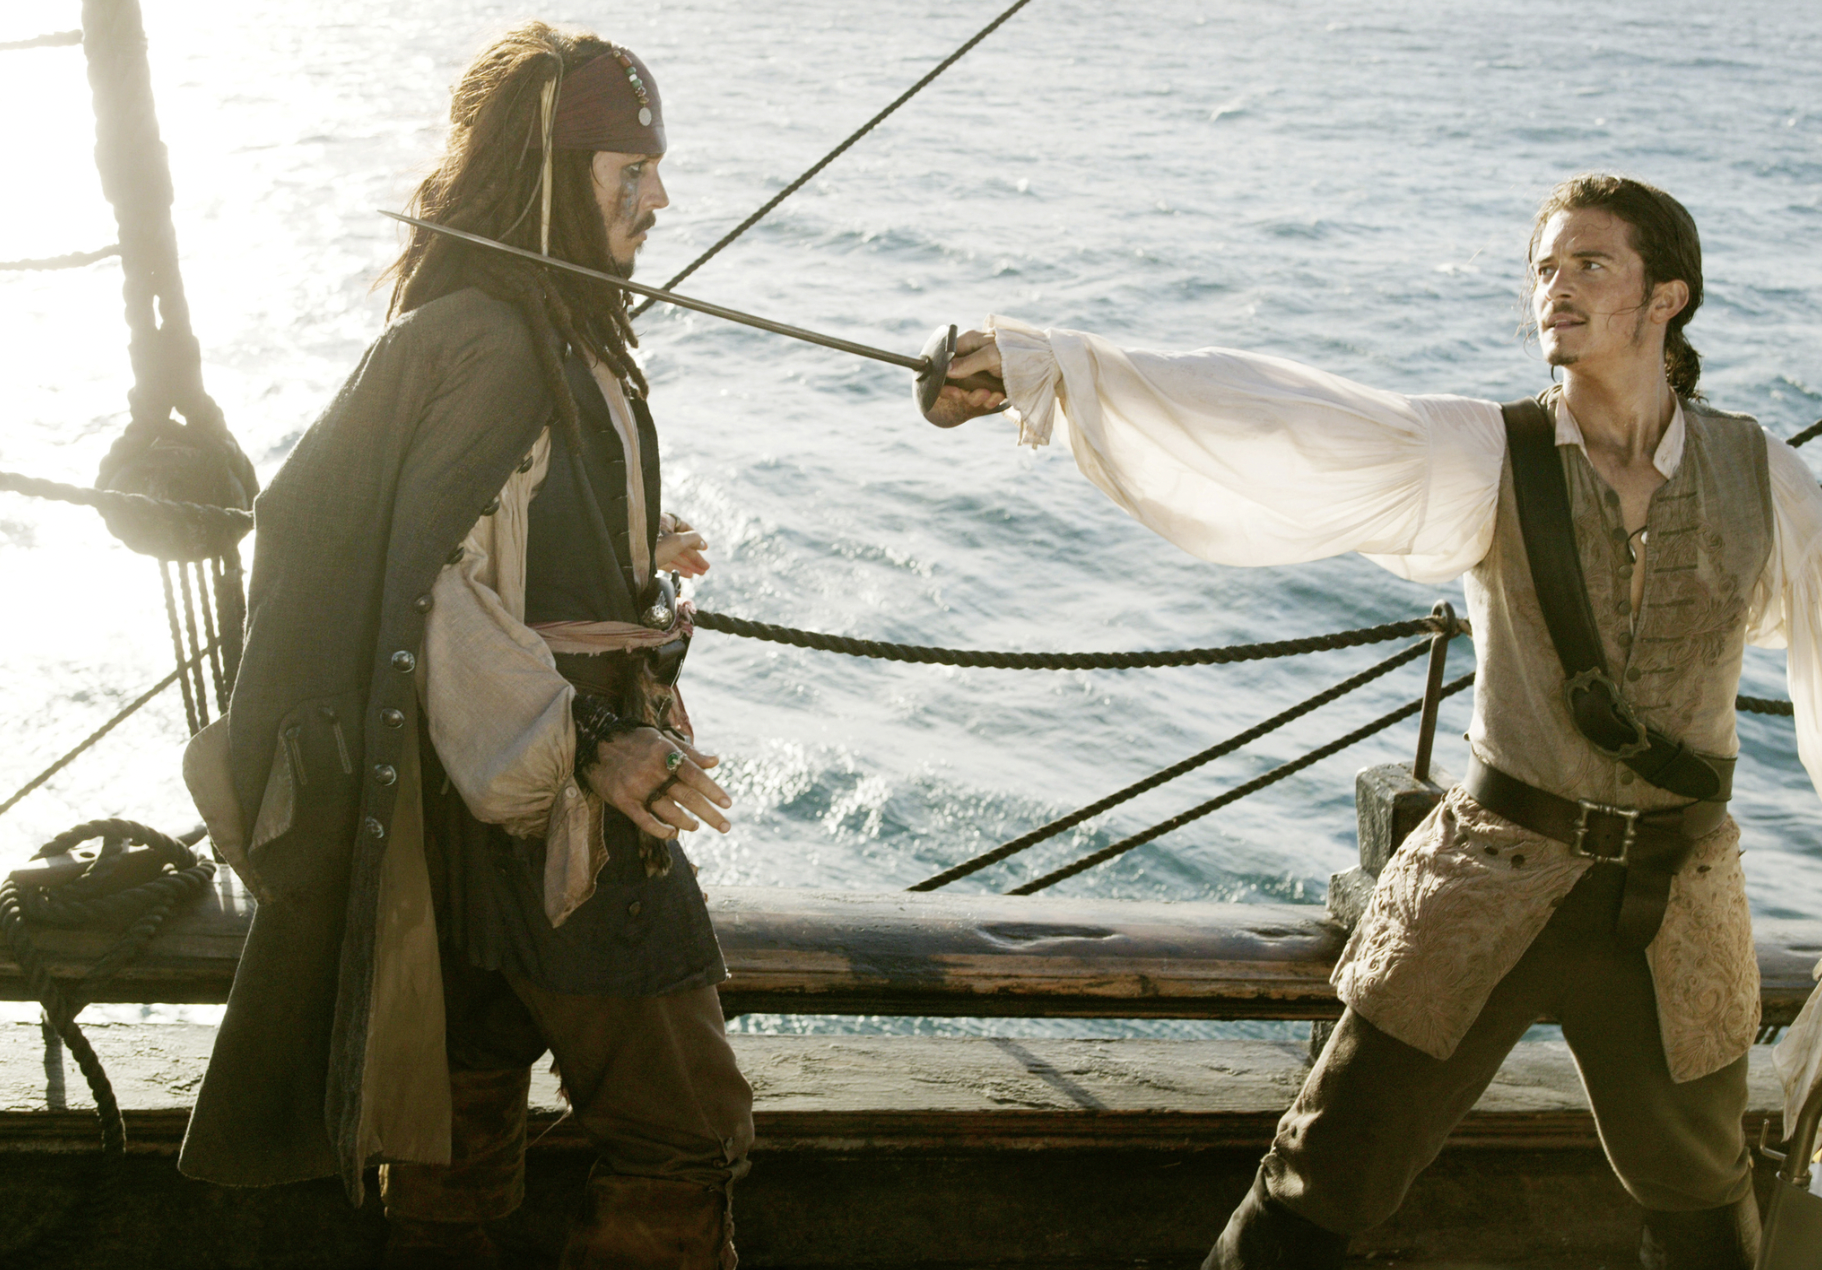 Pirates of the Caribbean': How to Watch the Movies in Order